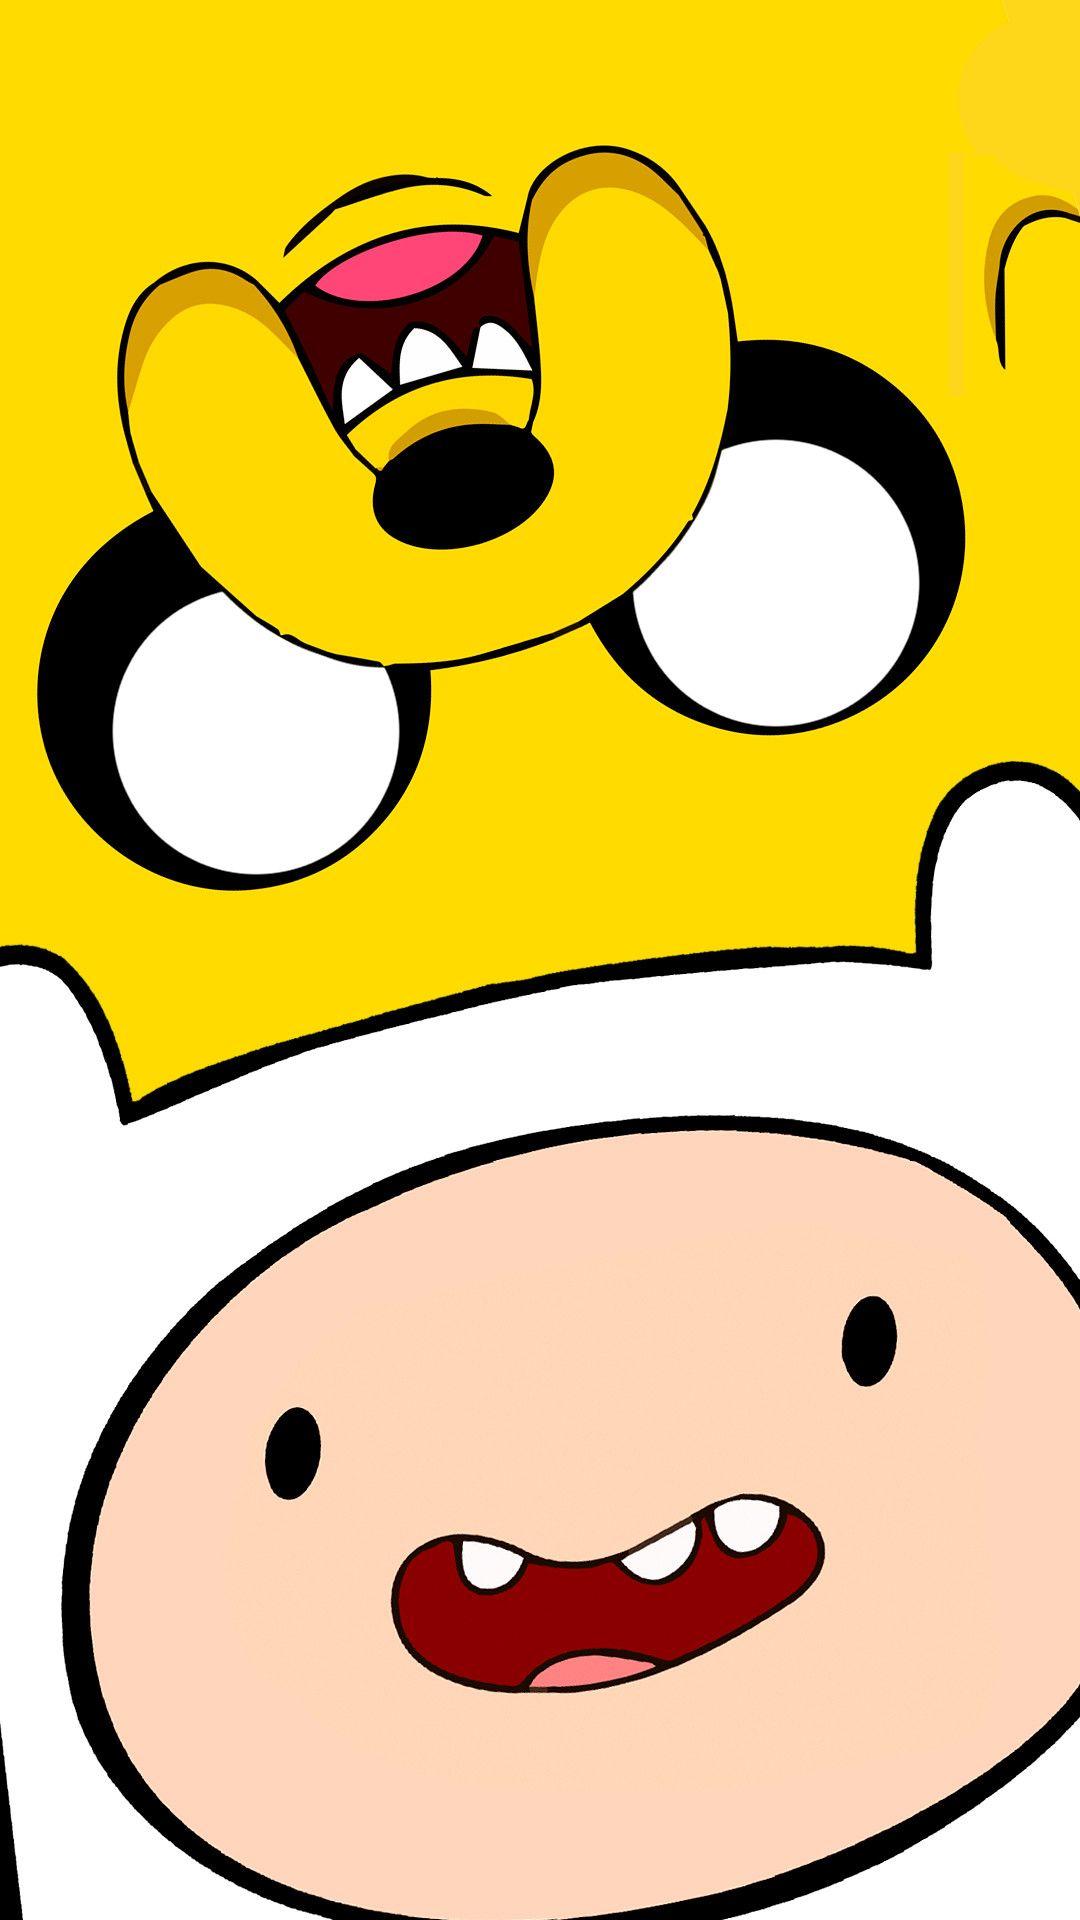 Finn And Jake Adventure Time Android Background. Adventure time wallpaper, Jake adventure time, Adventure time cartoon